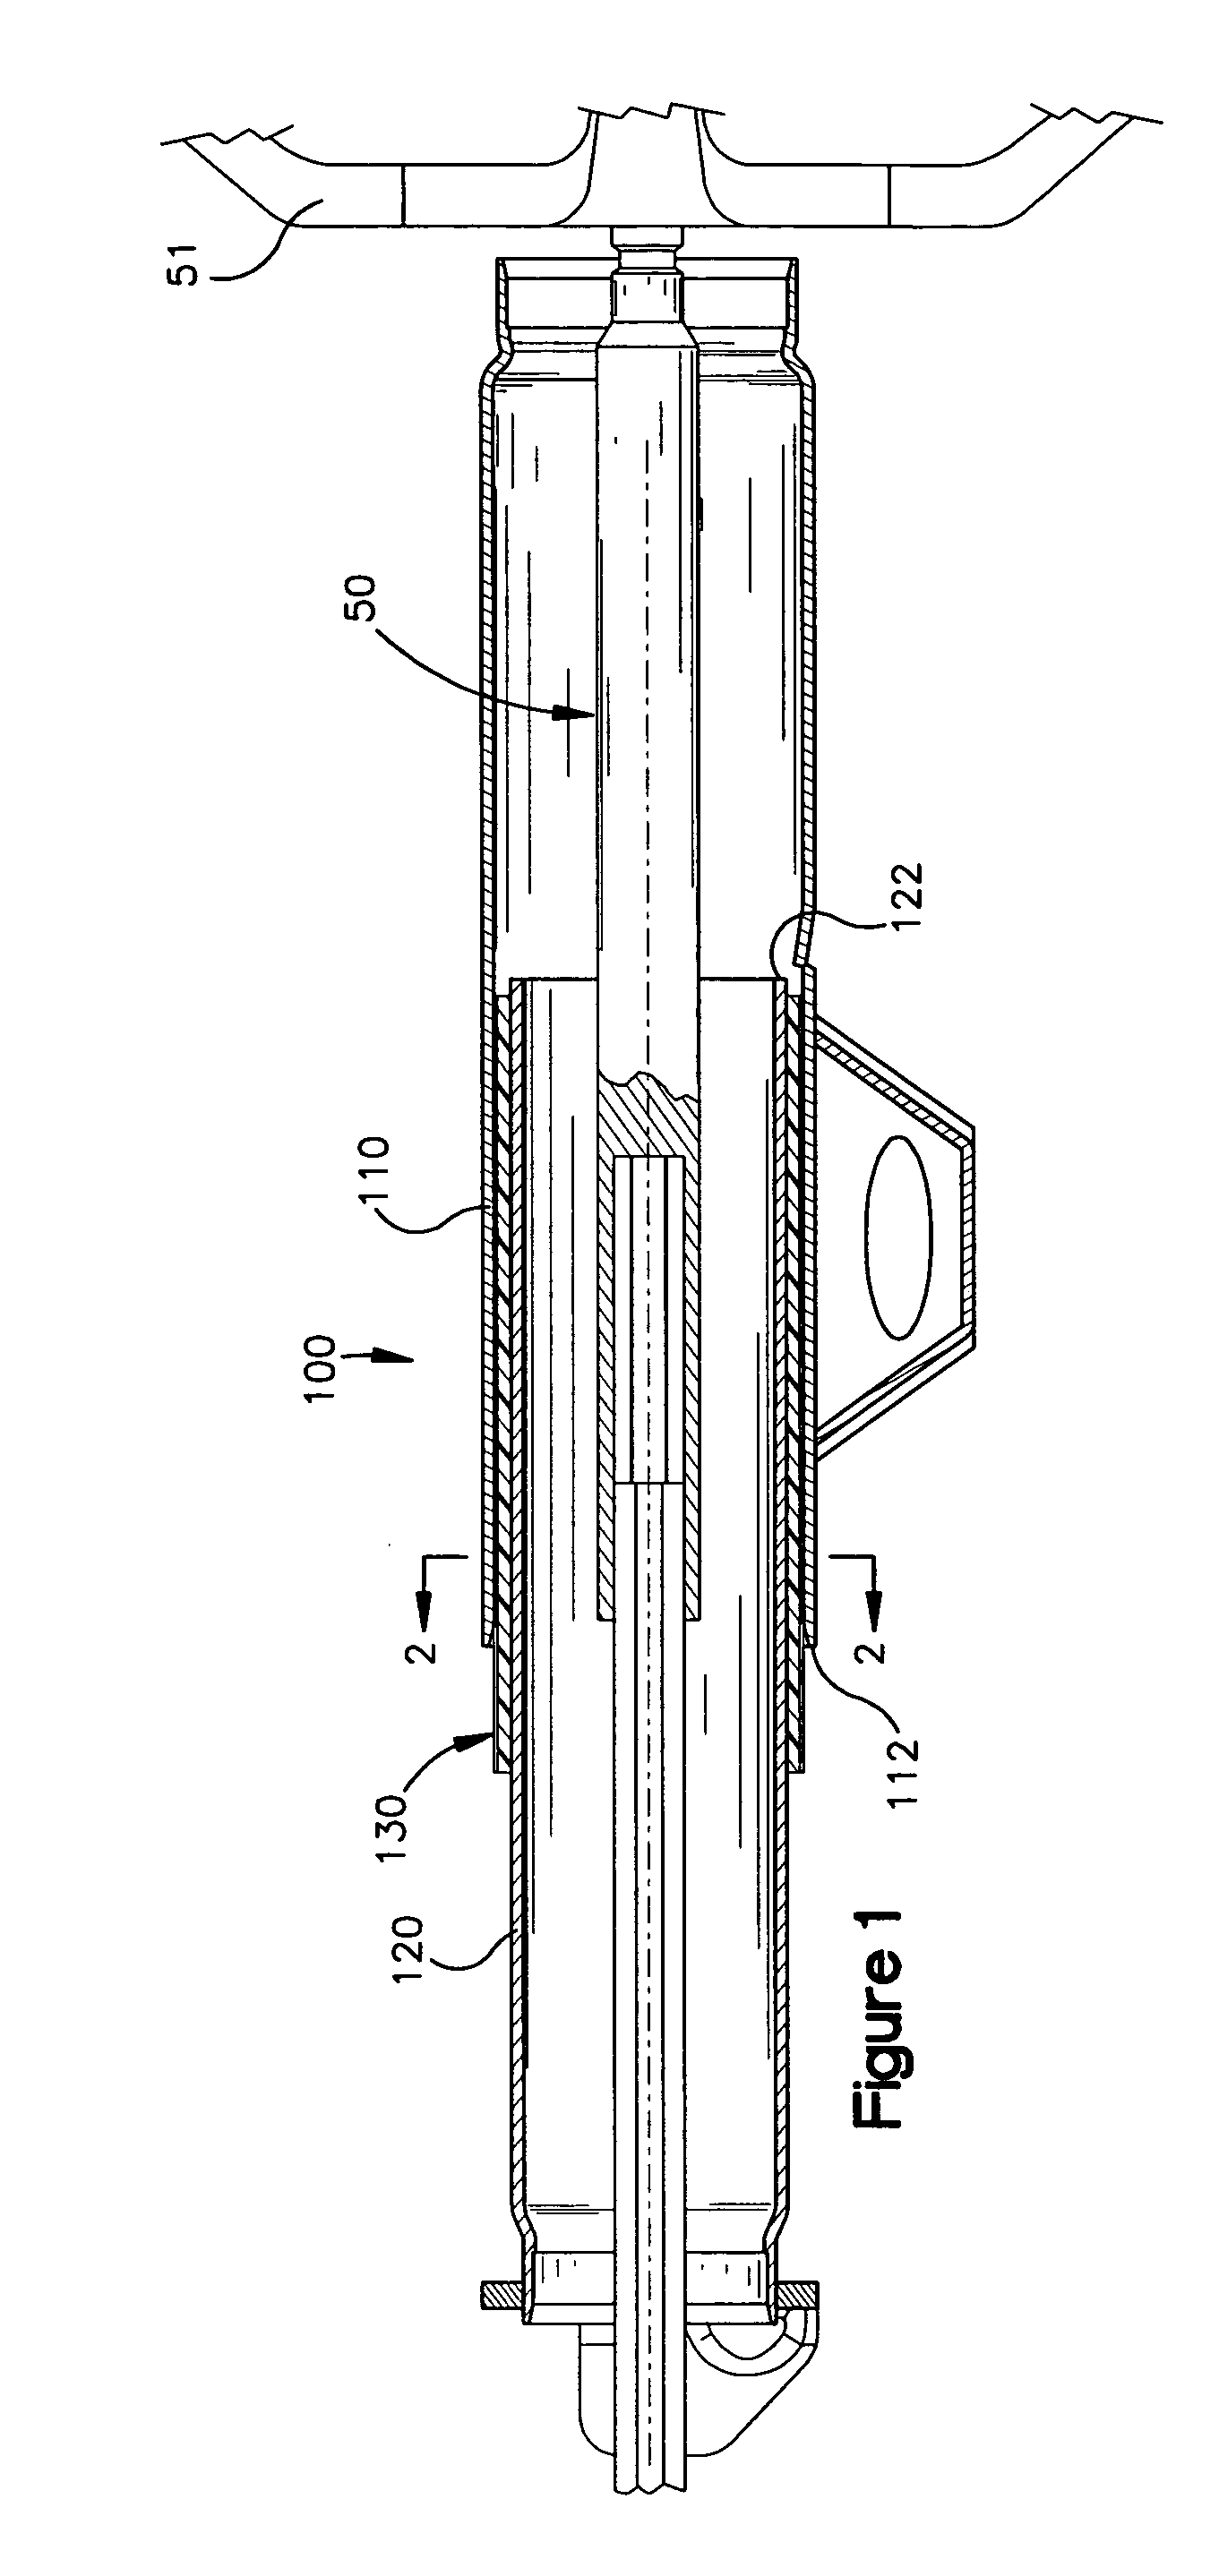 Axially adjustable steering column assembly with flexible bearing sleeve